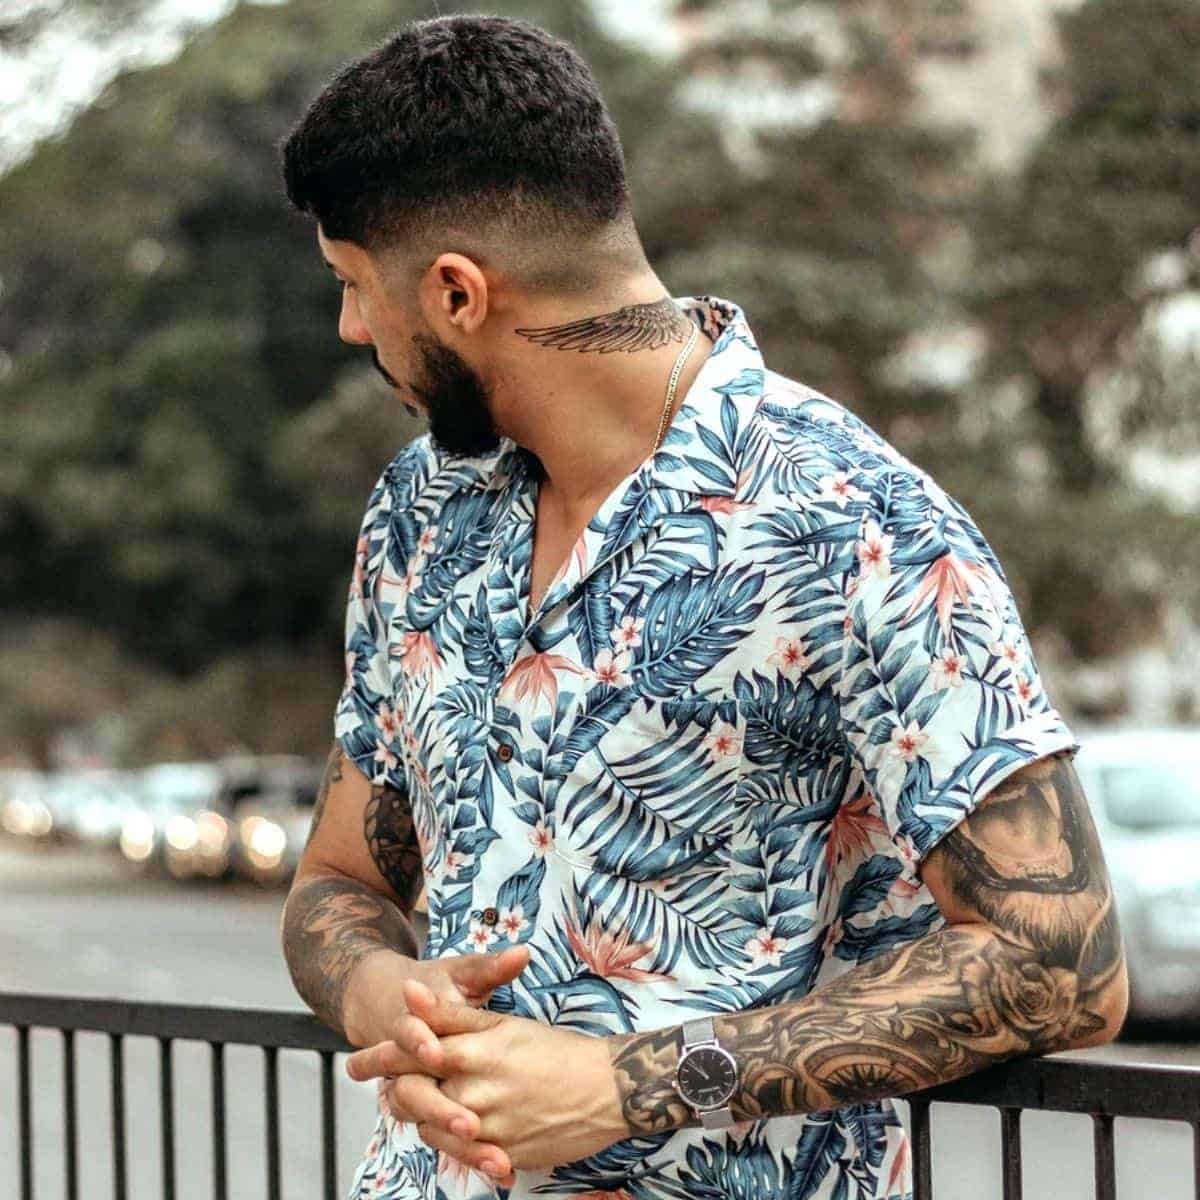 The 4 Best Tattoo Ideas for Men in 4 - Next Level Gents